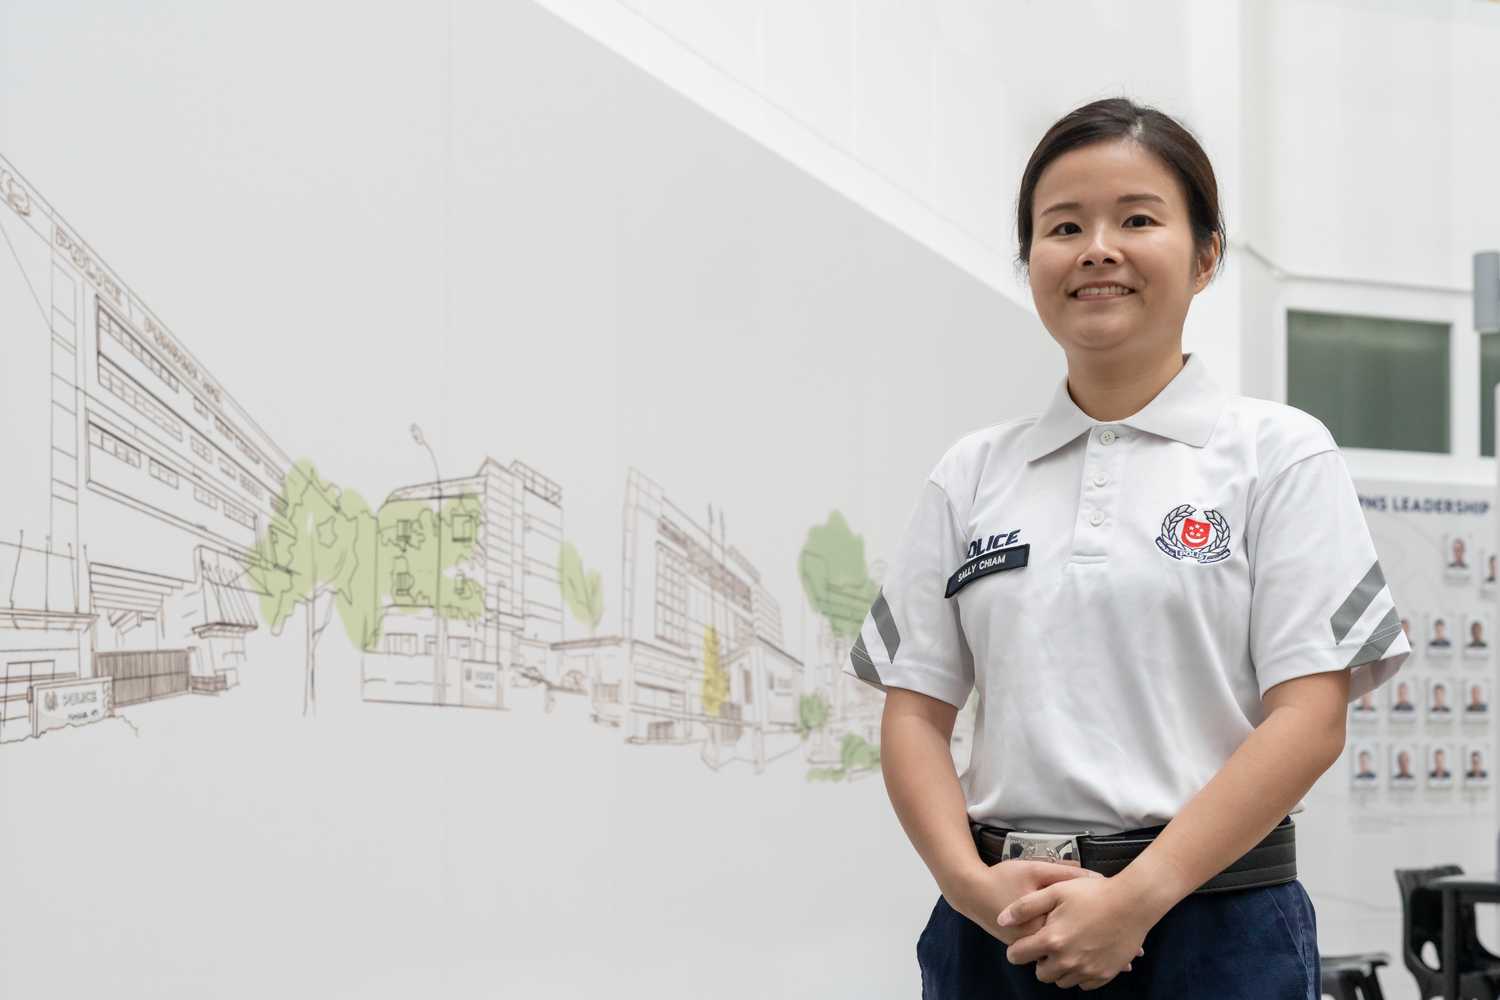 sergeant sally in her white cpu polo tee, standing infront of a wall with a mural. The mural design is architectural like and vectored